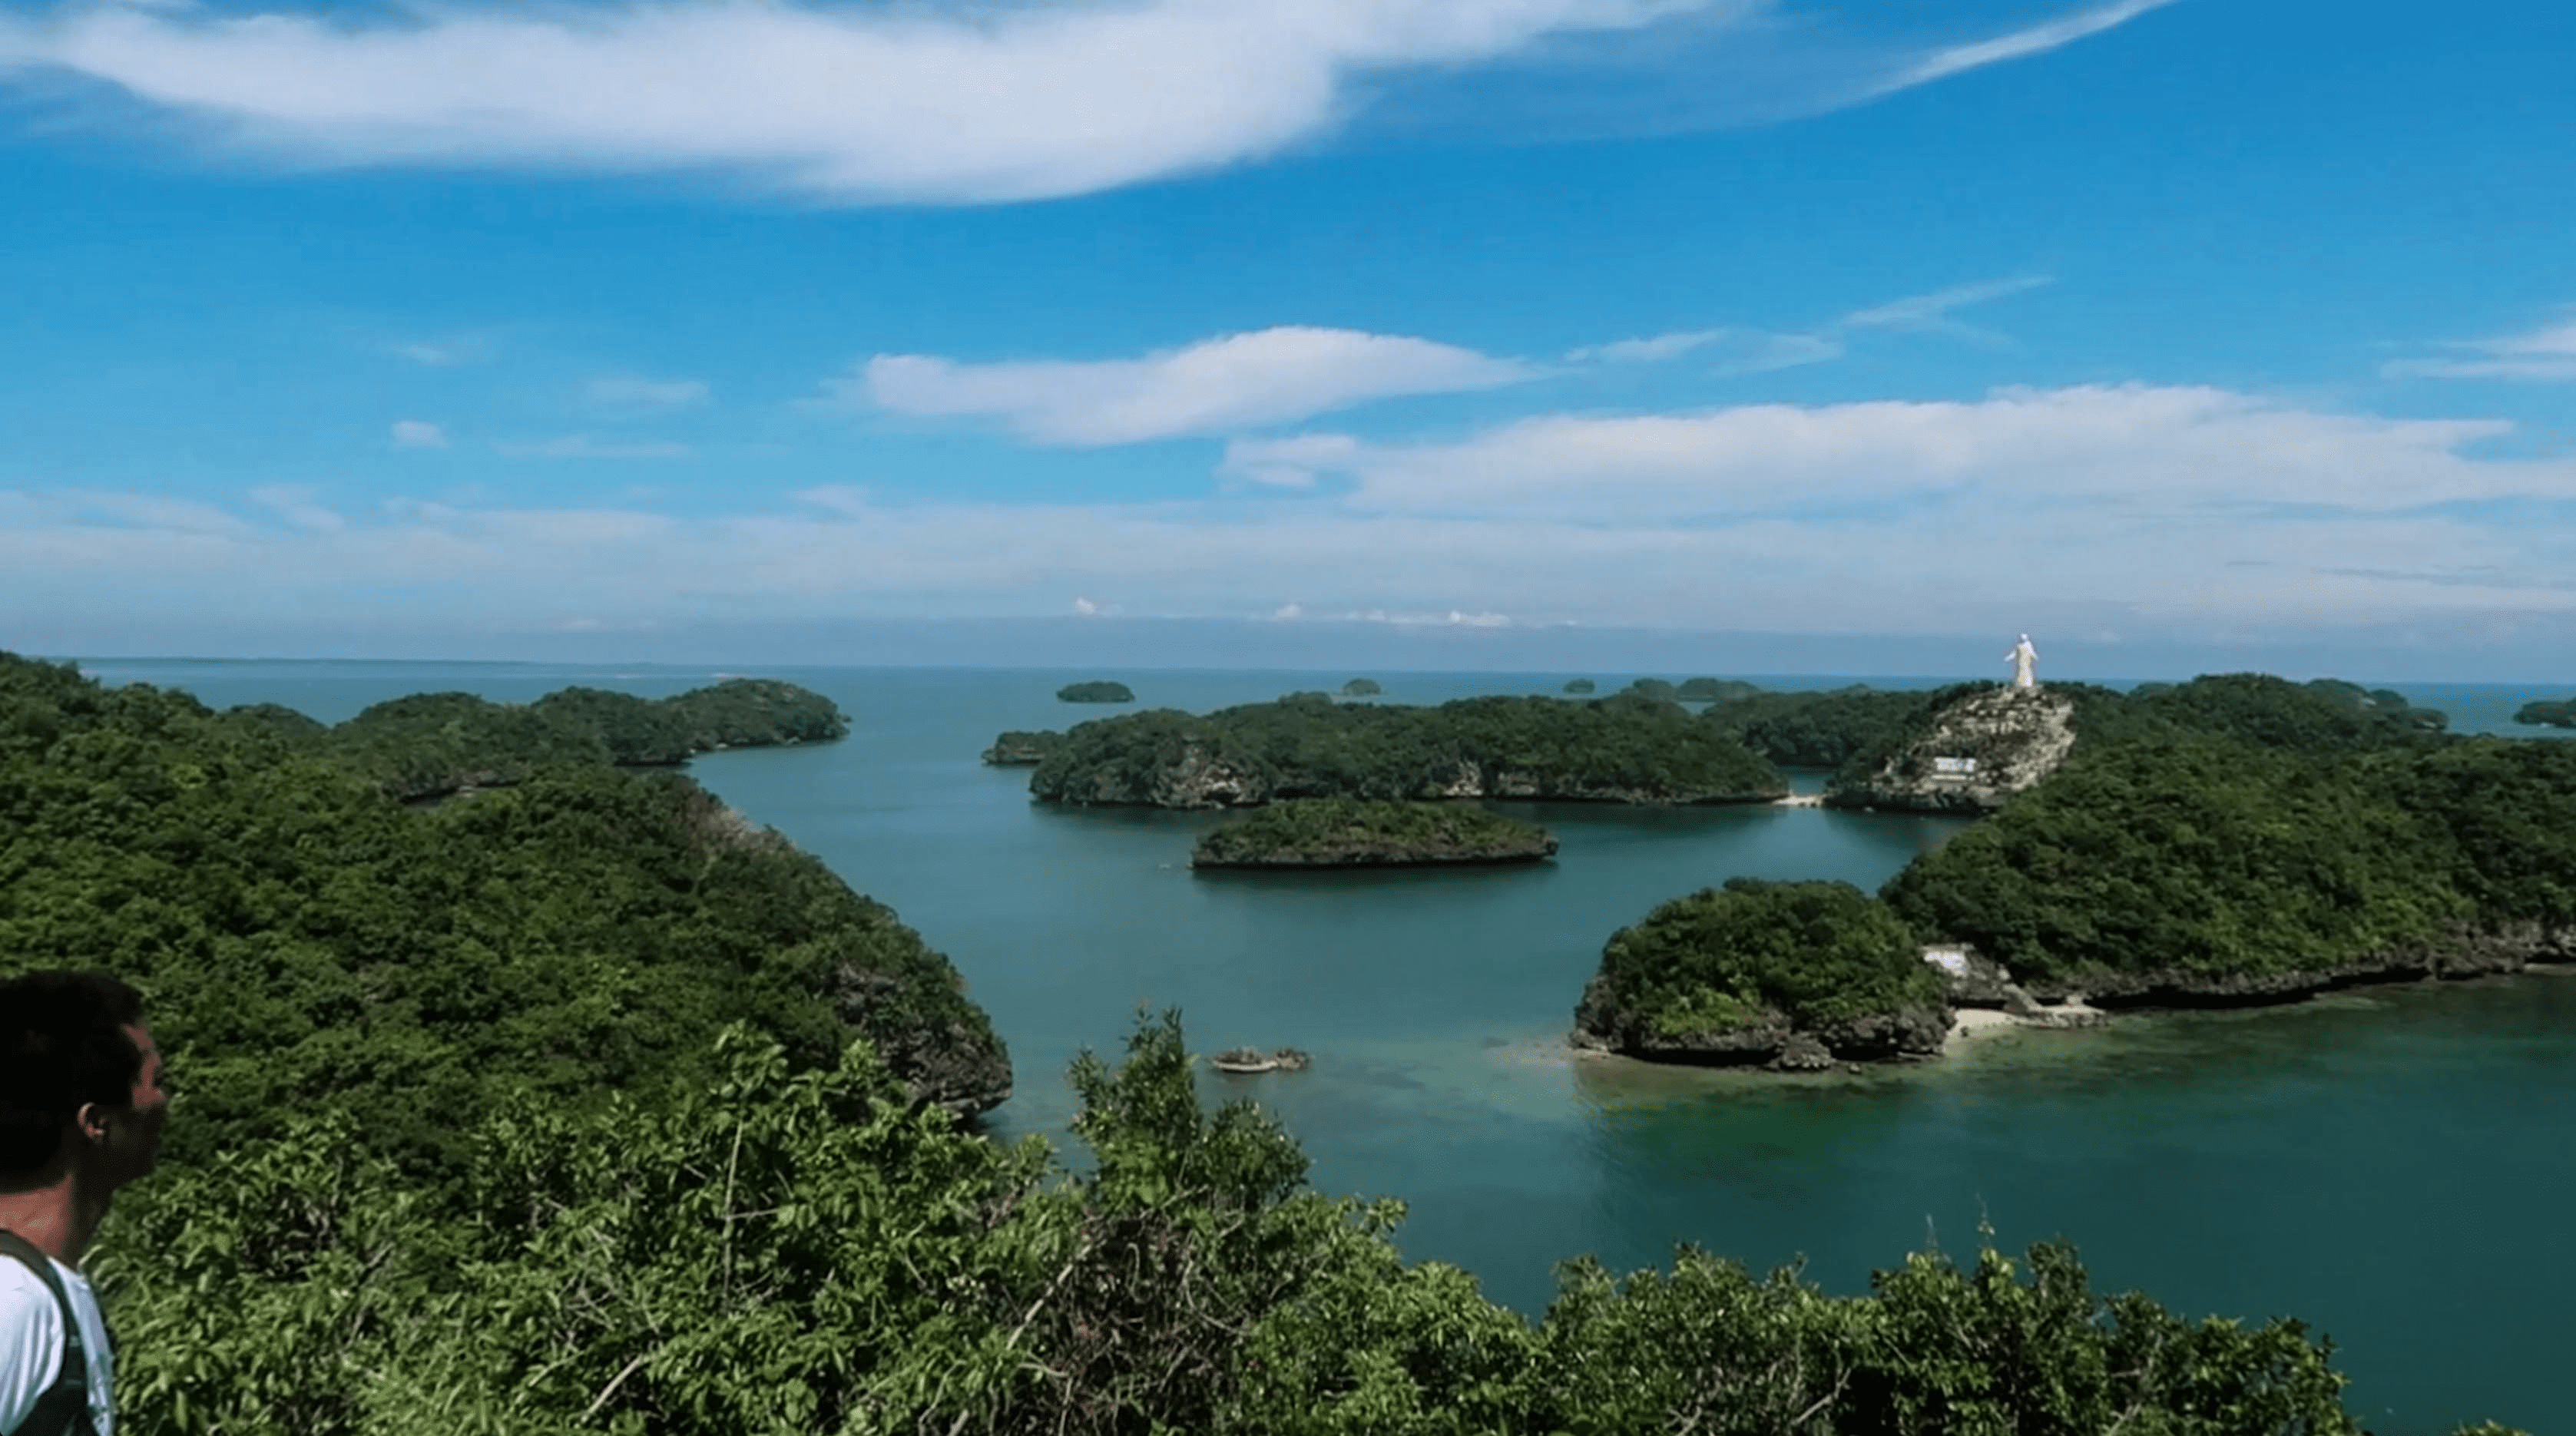 reynold enjoying view at observation deck at governor's island in hundred islands pangasinan philippines